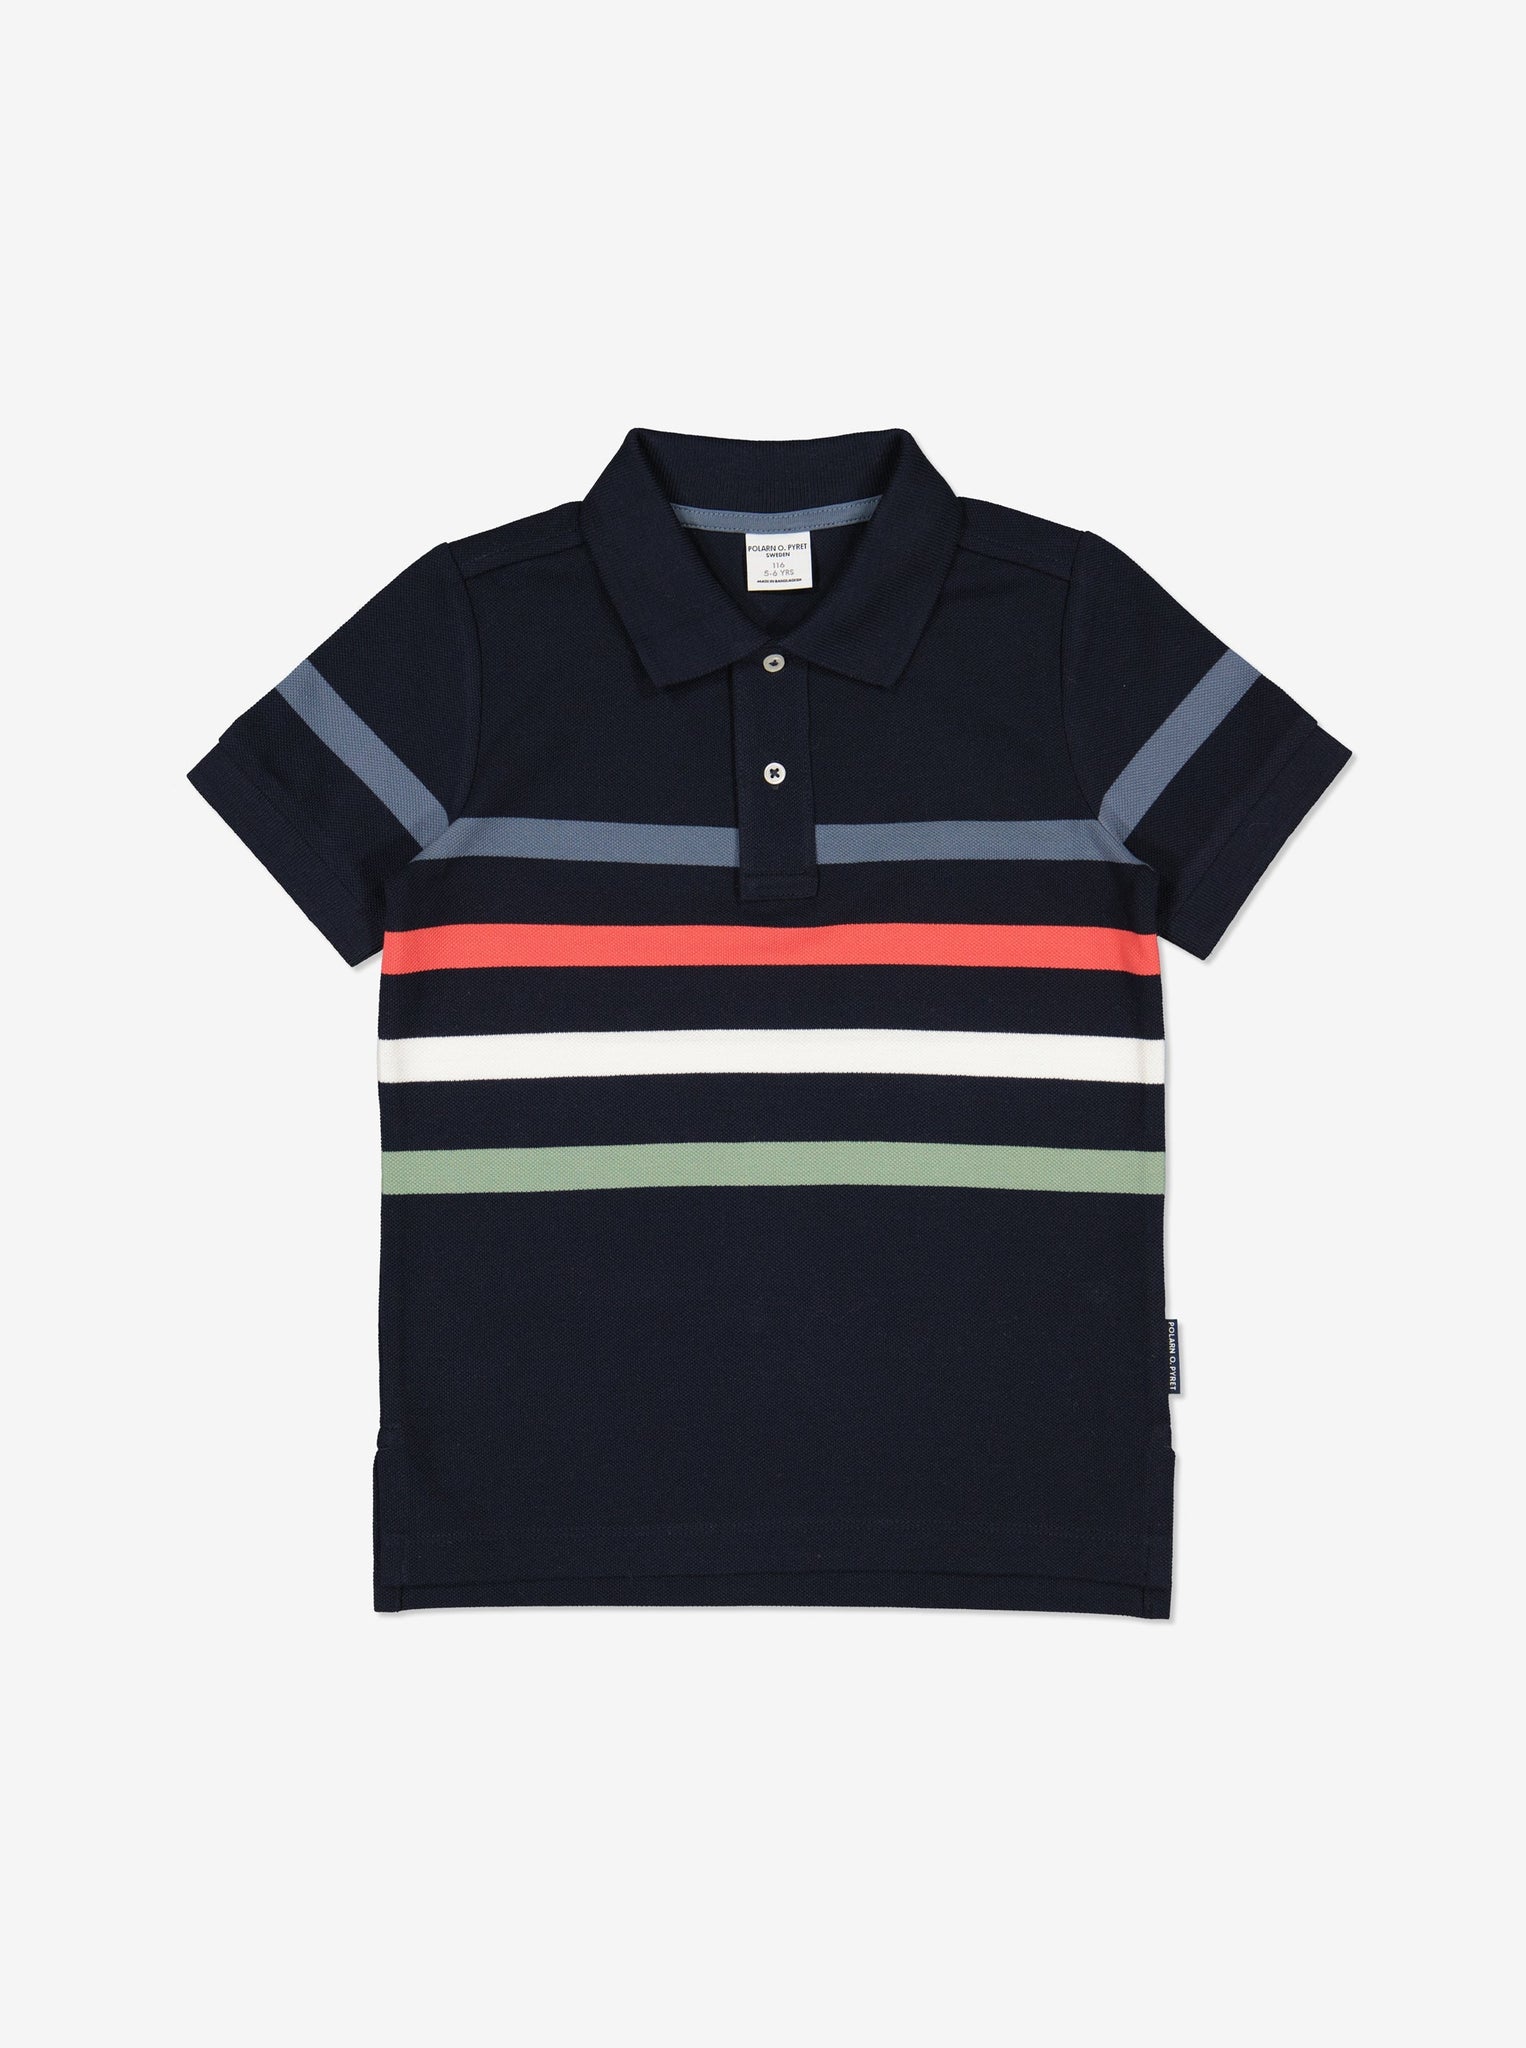 Striped Navy Boys Polo Top from Polarn O. Pyret Kidswear. Made from 100% GOTS Organic Cotton.